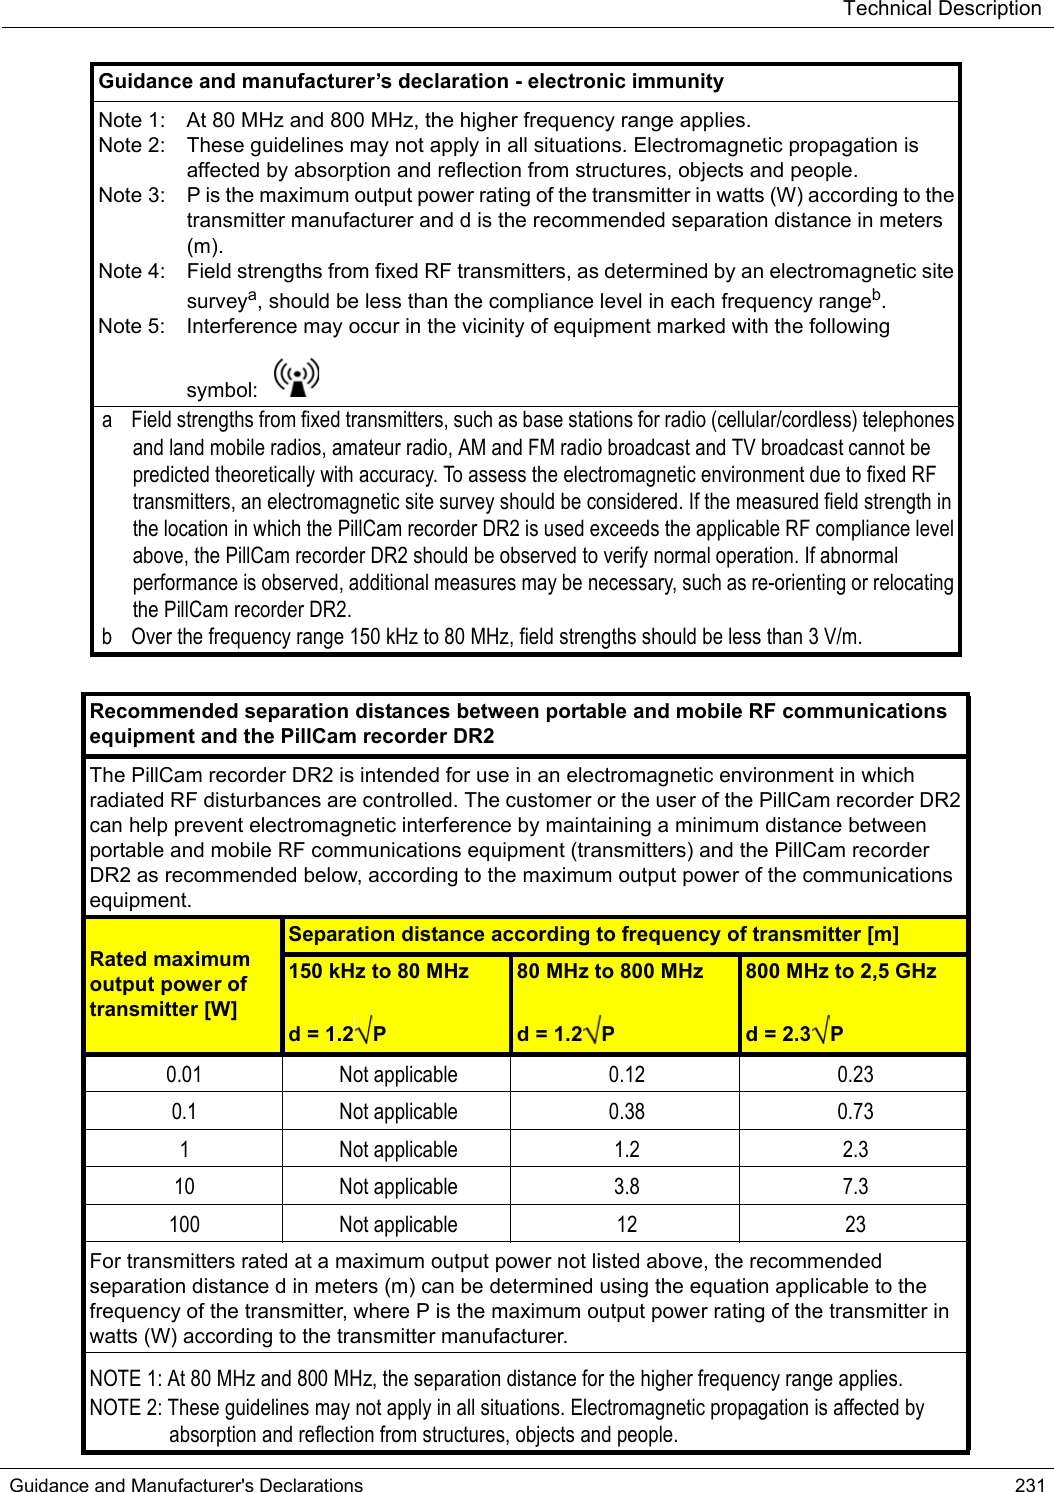 Technical DescriptionGuidance and Manufacturer&apos;s Declarations 231Note 1: At 80 MHz and 800 MHz, the higher frequency range applies.Note 2: These guidelines may not apply in all situations. Electromagnetic propagation is affected by absorption and reflection from structures, objects and people.Note 3: P is the maximum output power rating of the transmitter in watts (W) according to the transmitter manufacturer and d is the recommended separation distance in meters (m). Note 4: Field strengths from fixed RF transmitters, as determined by an electromagnetic site surveya, should be less than the compliance level in each frequency rangeb.Note 5: Interference may occur in the vicinity of equipment marked with the following symbol: a Field strengths from fixed transmitters, such as base stations for radio (cellular/cordless) telephones and land mobile radios, amateur radio, AM and FM radio broadcast and TV broadcast cannot be predicted theoretically with accuracy. To assess the electromagnetic environment due to fixed RF transmitters, an electromagnetic site survey should be considered. If the measured field strength in the location in which the PillCam recorder DR2 is used exceeds the applicable RF compliance level above, the PillCam recorder DR2 should be observed to verify normal operation. If abnormal performance is observed, additional measures may be necessary, such as re-orienting or relocating the PillCam recorder DR2.b Over the frequency range 150 kHz to 80 MHz, field strengths should be less than 3 V/m.Recommended separation distances between portable and mobile RF communications equipment and the PillCam recorder DR2The PillCam recorder DR2 is intended for use in an electromagnetic environment in which radiated RF disturbances are controlled. The customer or the user of the PillCam recorder DR2 can help prevent electromagnetic interference by maintaining a minimum distance between portable and mobile RF communications equipment (transmitters) and the PillCam recorder DR2 as recommended below, according to the maximum output power of the communications equipment.Rated maximum output power of transmitter [W]Separation distance according to frequency of transmitter [m]150 kHz to 80 MHzd = 1.2 P80 MHz to 800 MHzd = 1.2 P800 MHz to 2,5 GHzd = 2.3 P0.01 Not applicable 0.12 0.230.1 Not applicable 0.38 0.731 Not applicable 1.2 2.310 Not applicable 3.8 7.3100 Not applicable 12 23For transmitters rated at a maximum output power not listed above, the recommended separation distance d in meters (m) can be determined using the equation applicable to the frequency of the transmitter, where P is the maximum output power rating of the transmitter in watts (W) according to the transmitter manufacturer.NOTE 1: At 80 MHz and 800 MHz, the separation distance for the higher frequency range applies.NOTE 2: These guidelines may not apply in all situations. Electromagnetic propagation is affected by absorption and reflection from structures, objects and people.Guidance and manufacturer’s declaration - electronic immunity